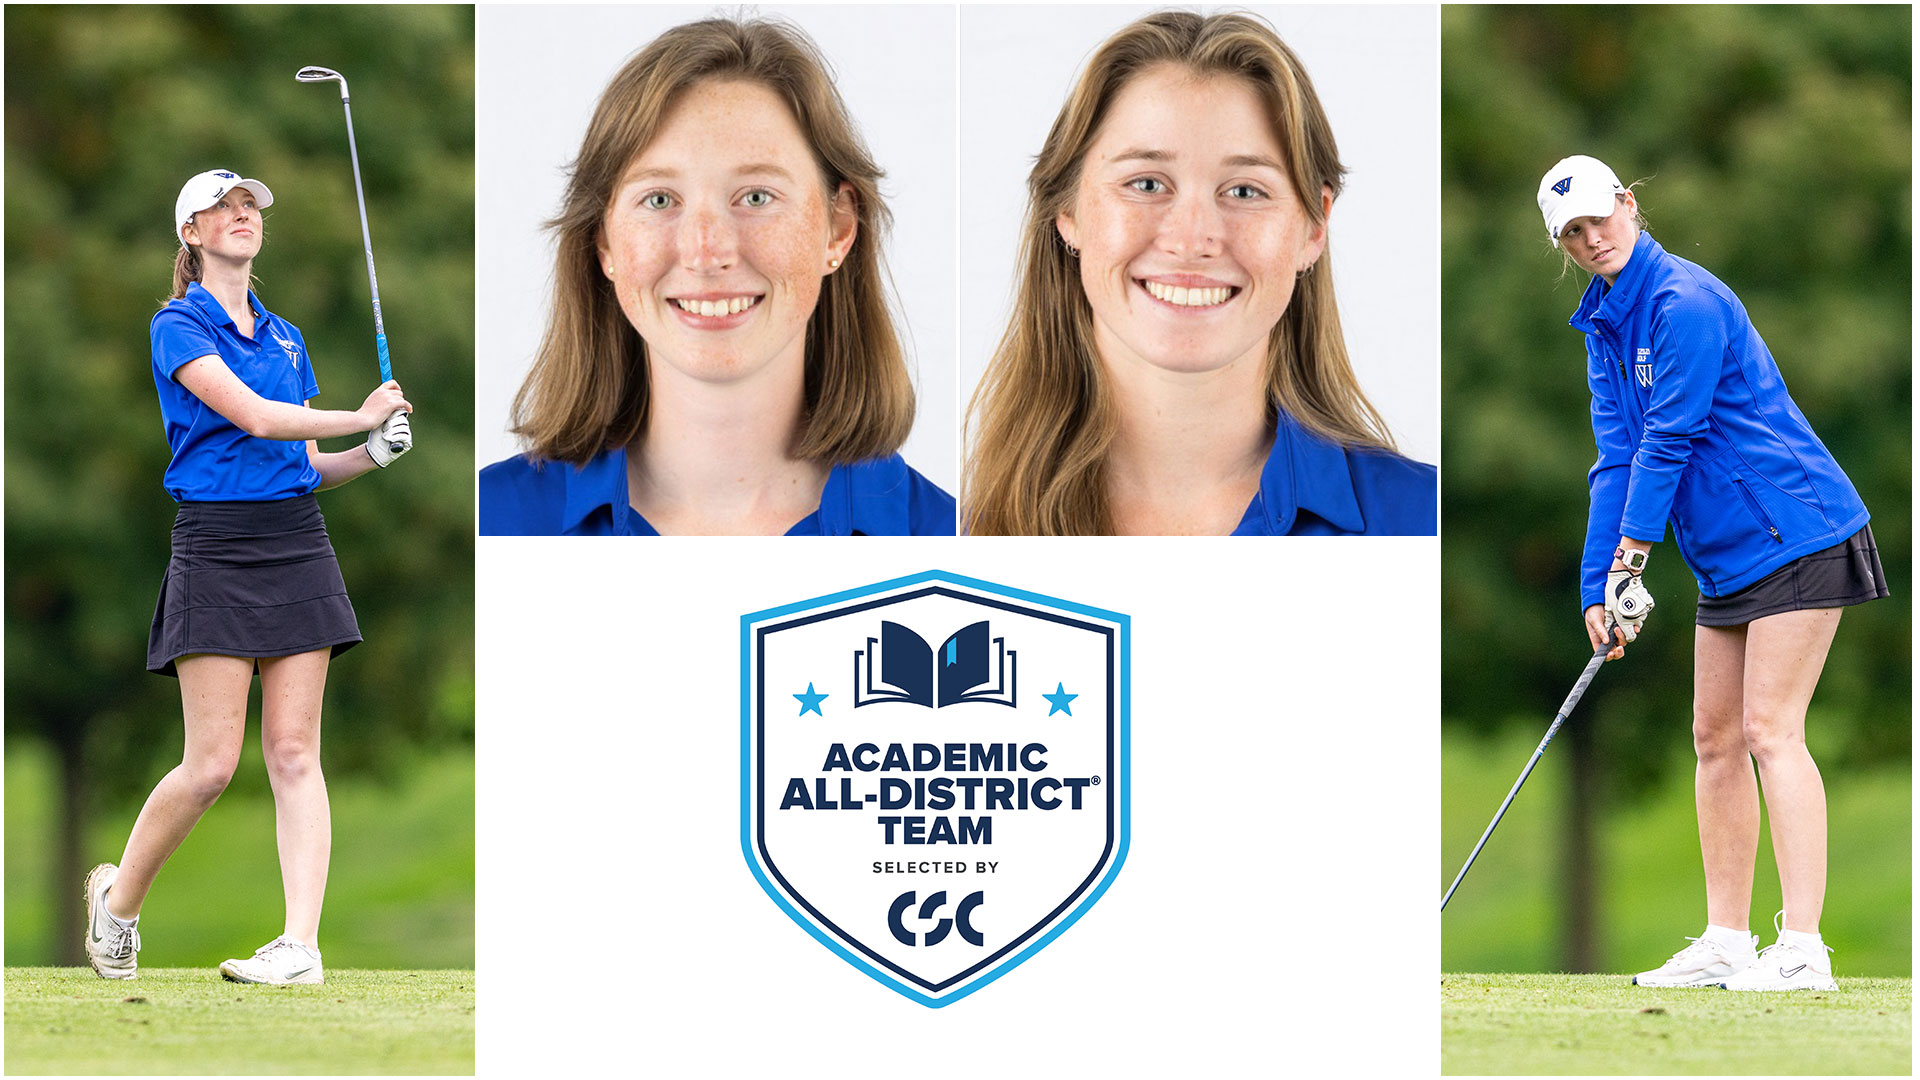 Caroline MacVicar '23 and Kate MacVicar were named to the CSC Academic All-District Team.